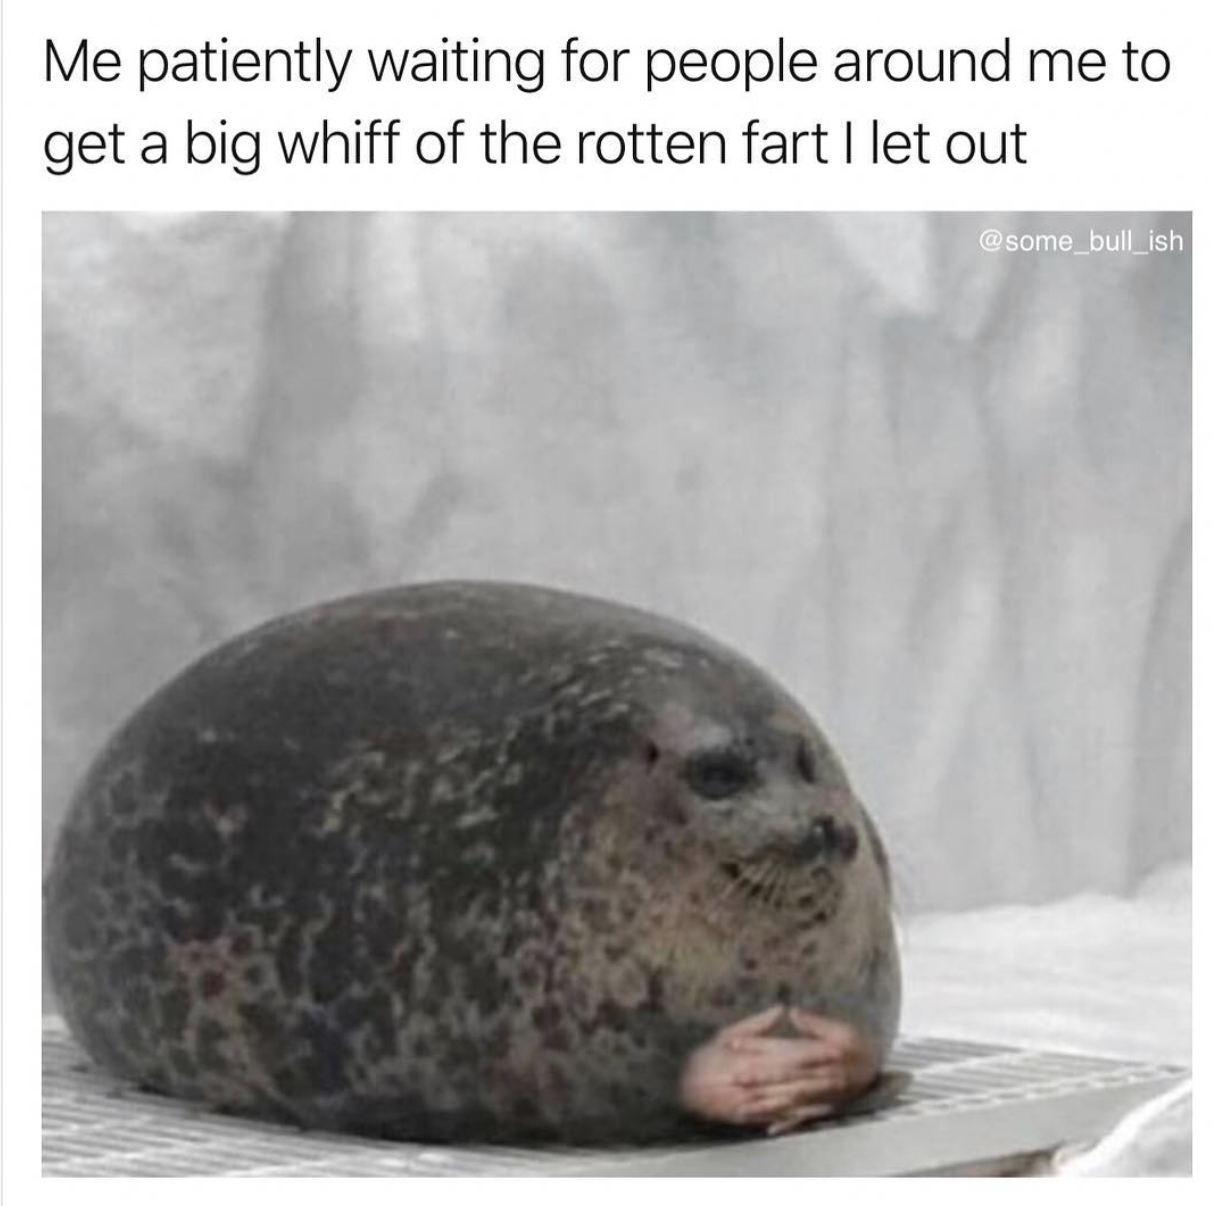 seal waiting meme - Me patiently waiting for people around me to get a big whiff of the rotten fart I let out some bullish